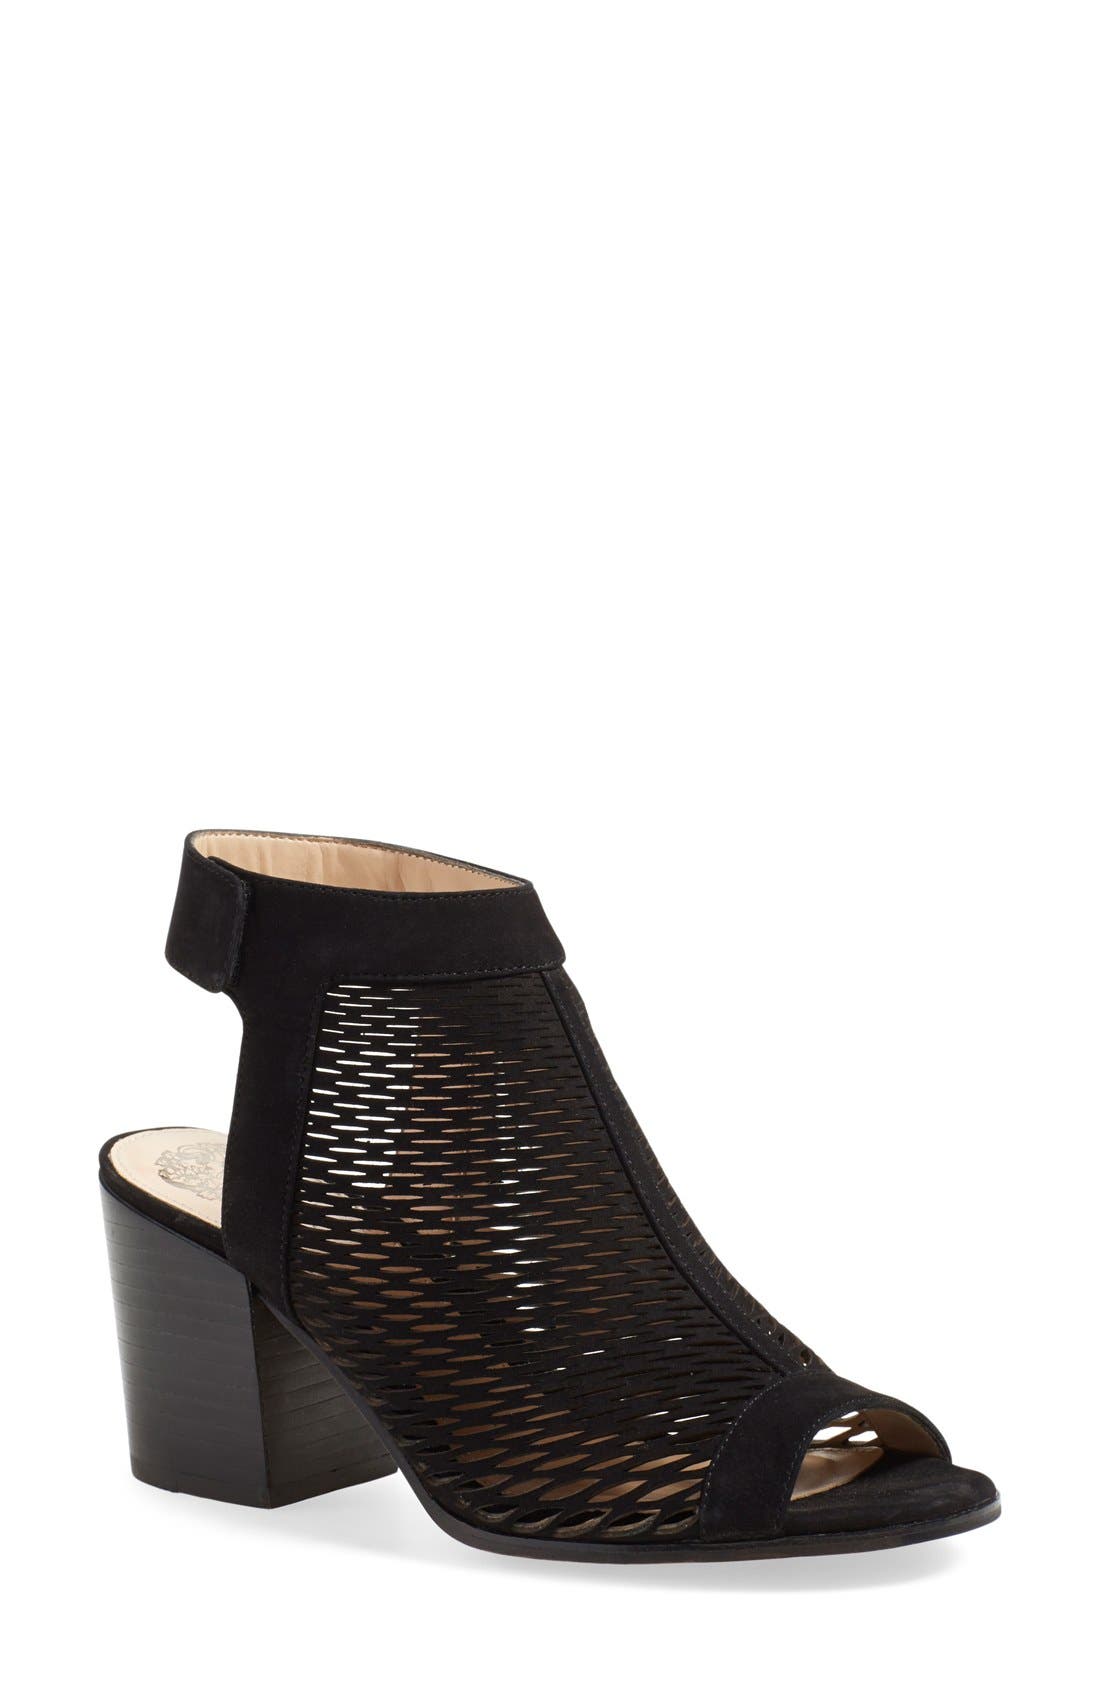 vince camuto open toe shoes